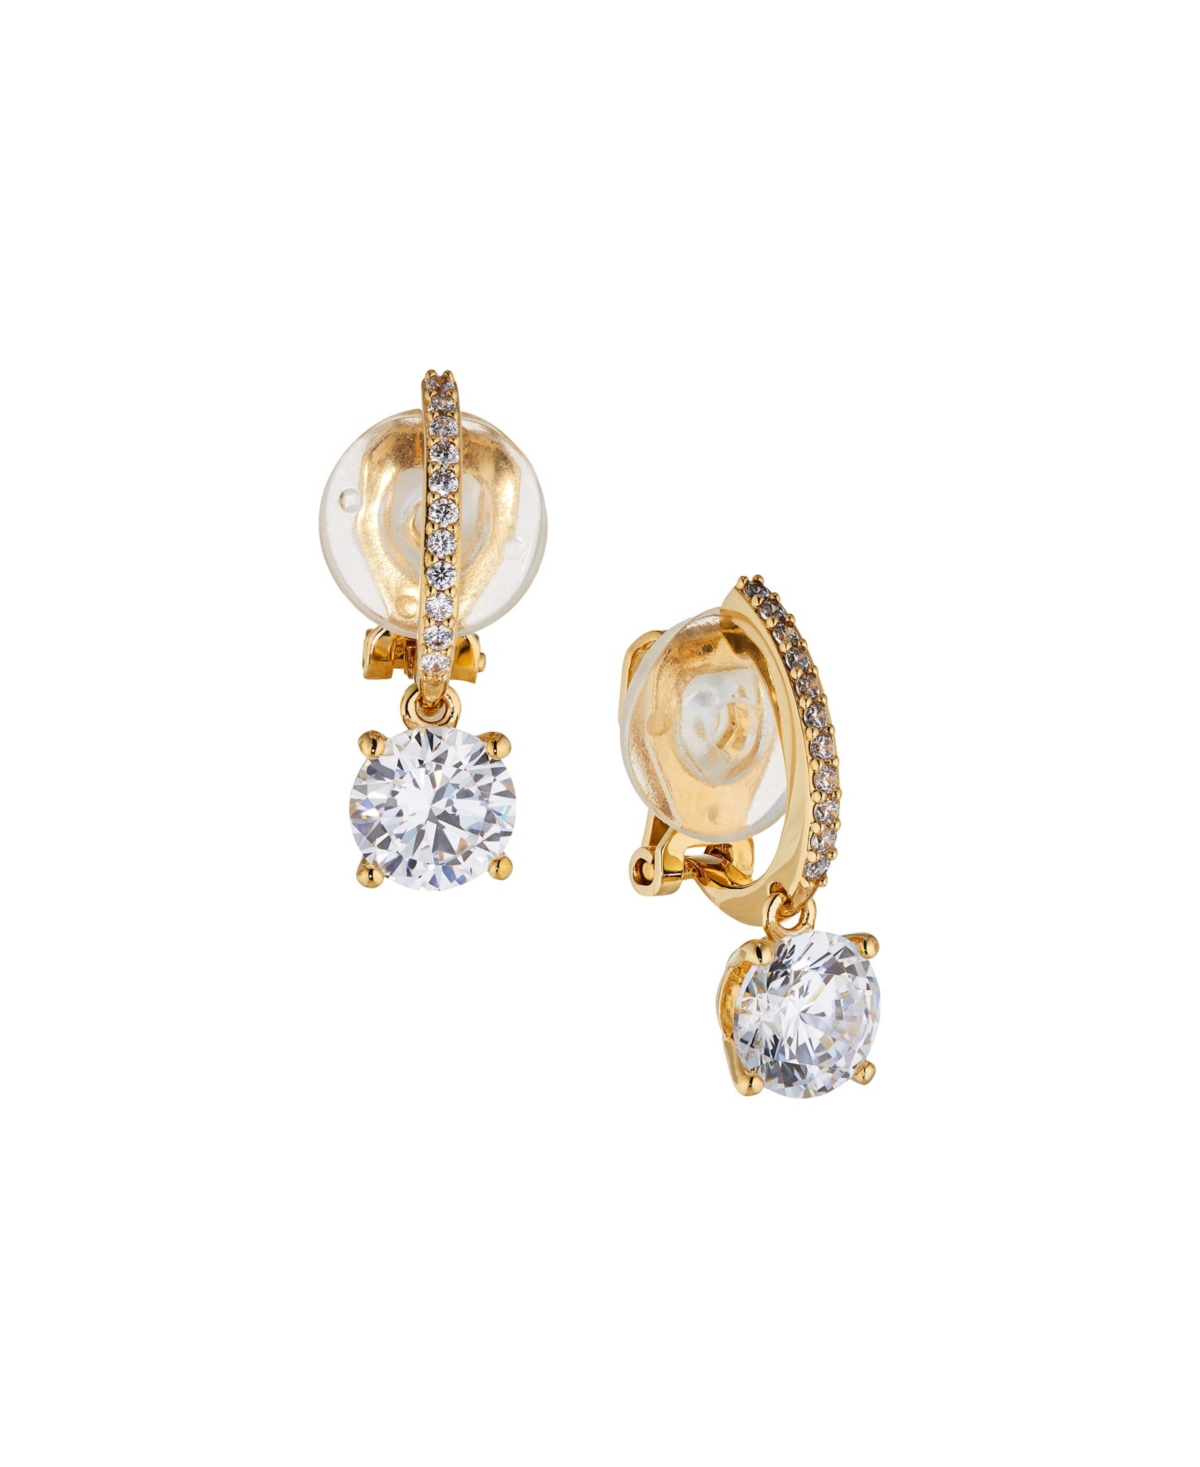 Eliot Danori 18k Gold Plated Clip Earrings, Created For Macy's In Gold-plated